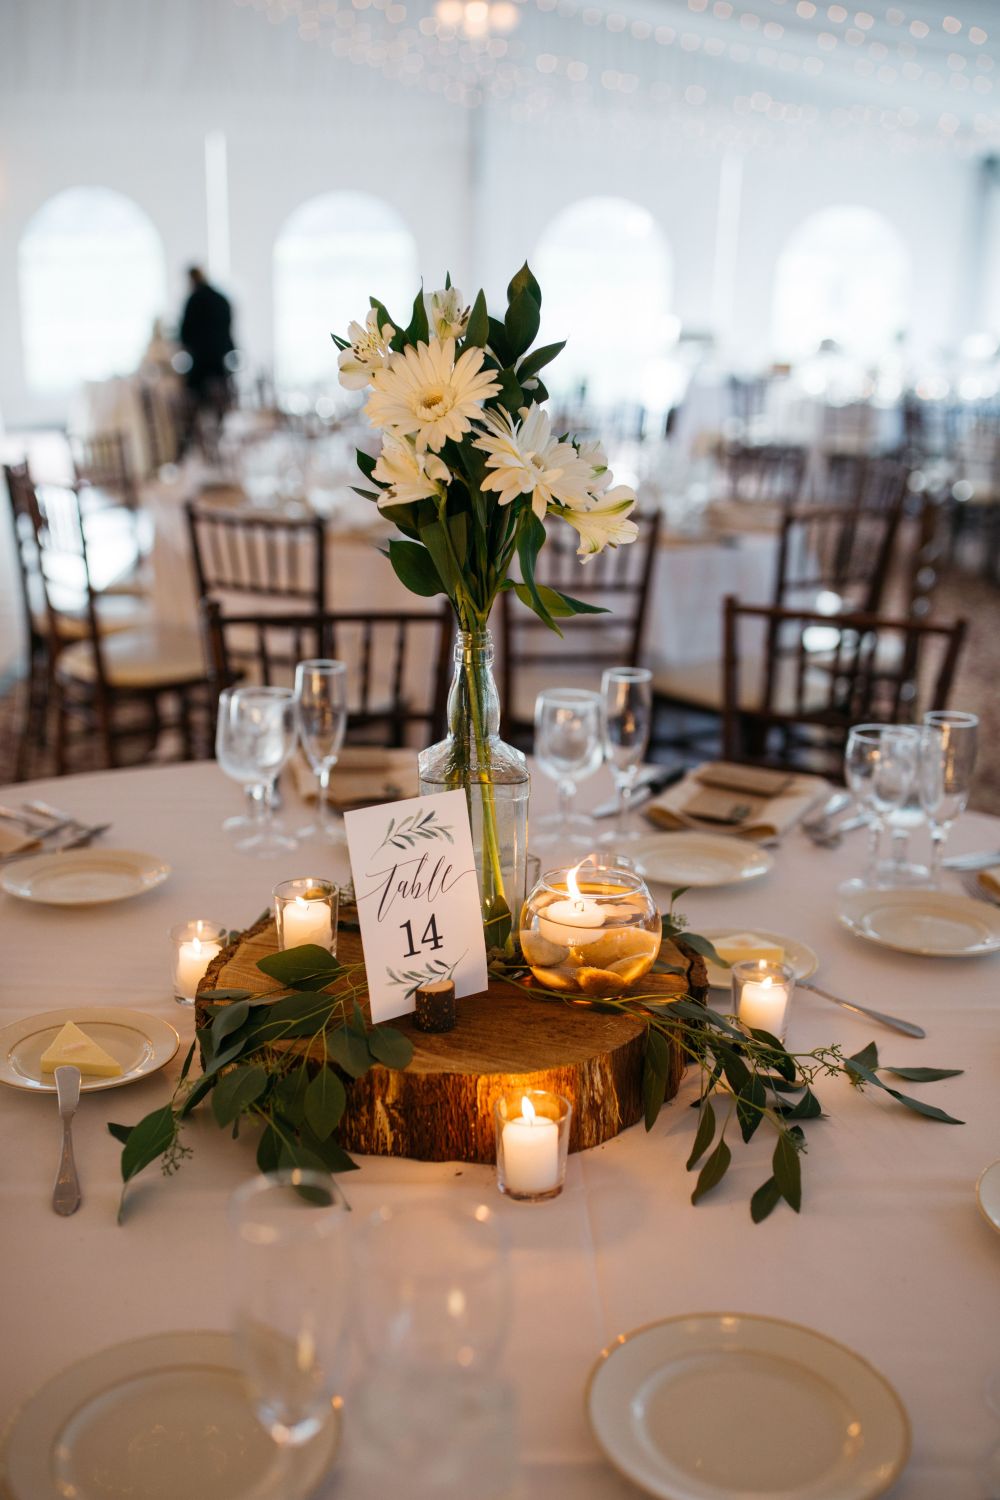 rustic simple white flowers in jar with tree stump wedding centerpiece